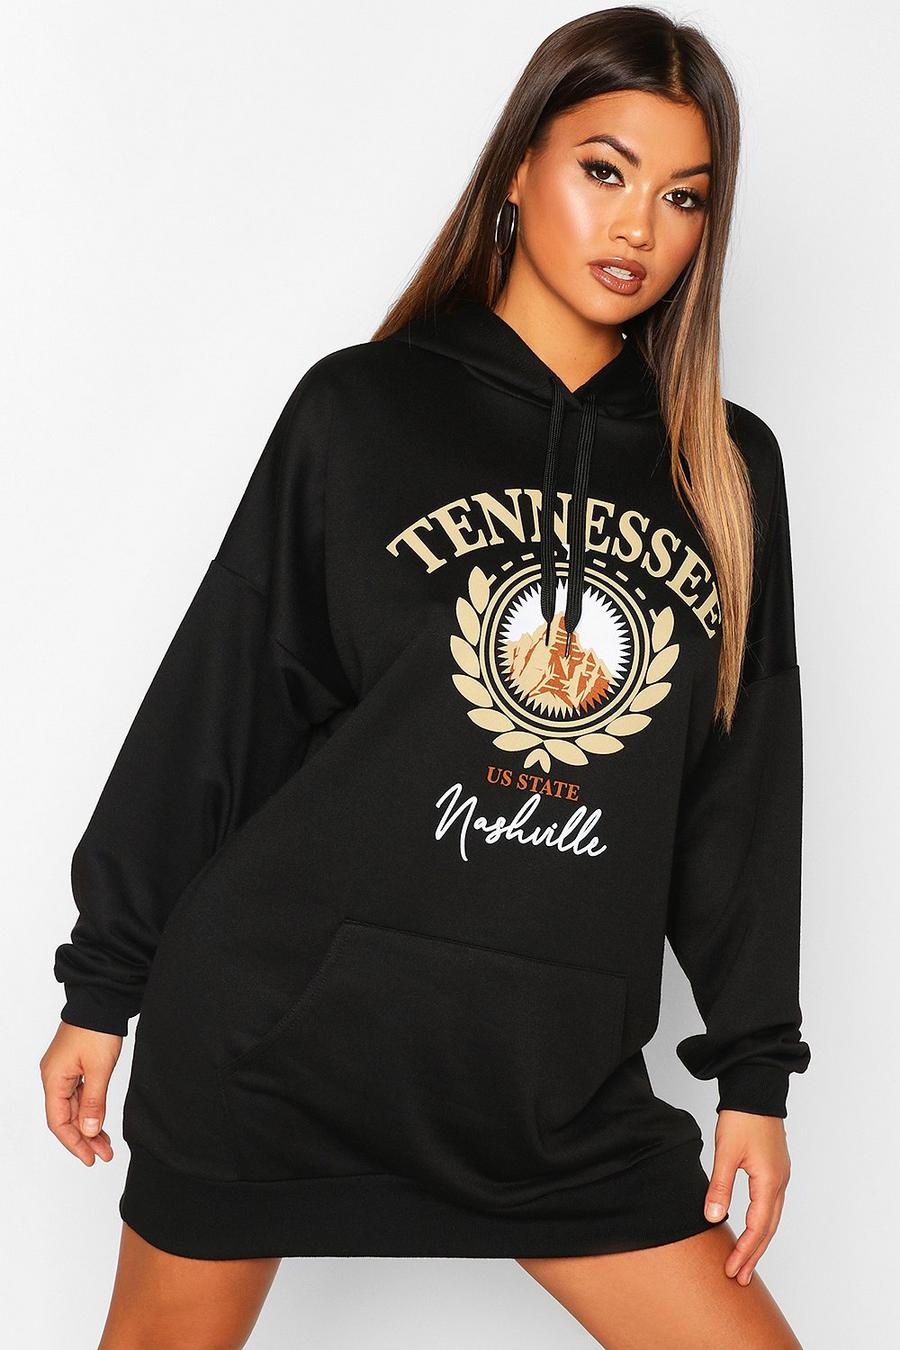 Tennesse Graphic Hooded Sweatshirt Dress image number 1